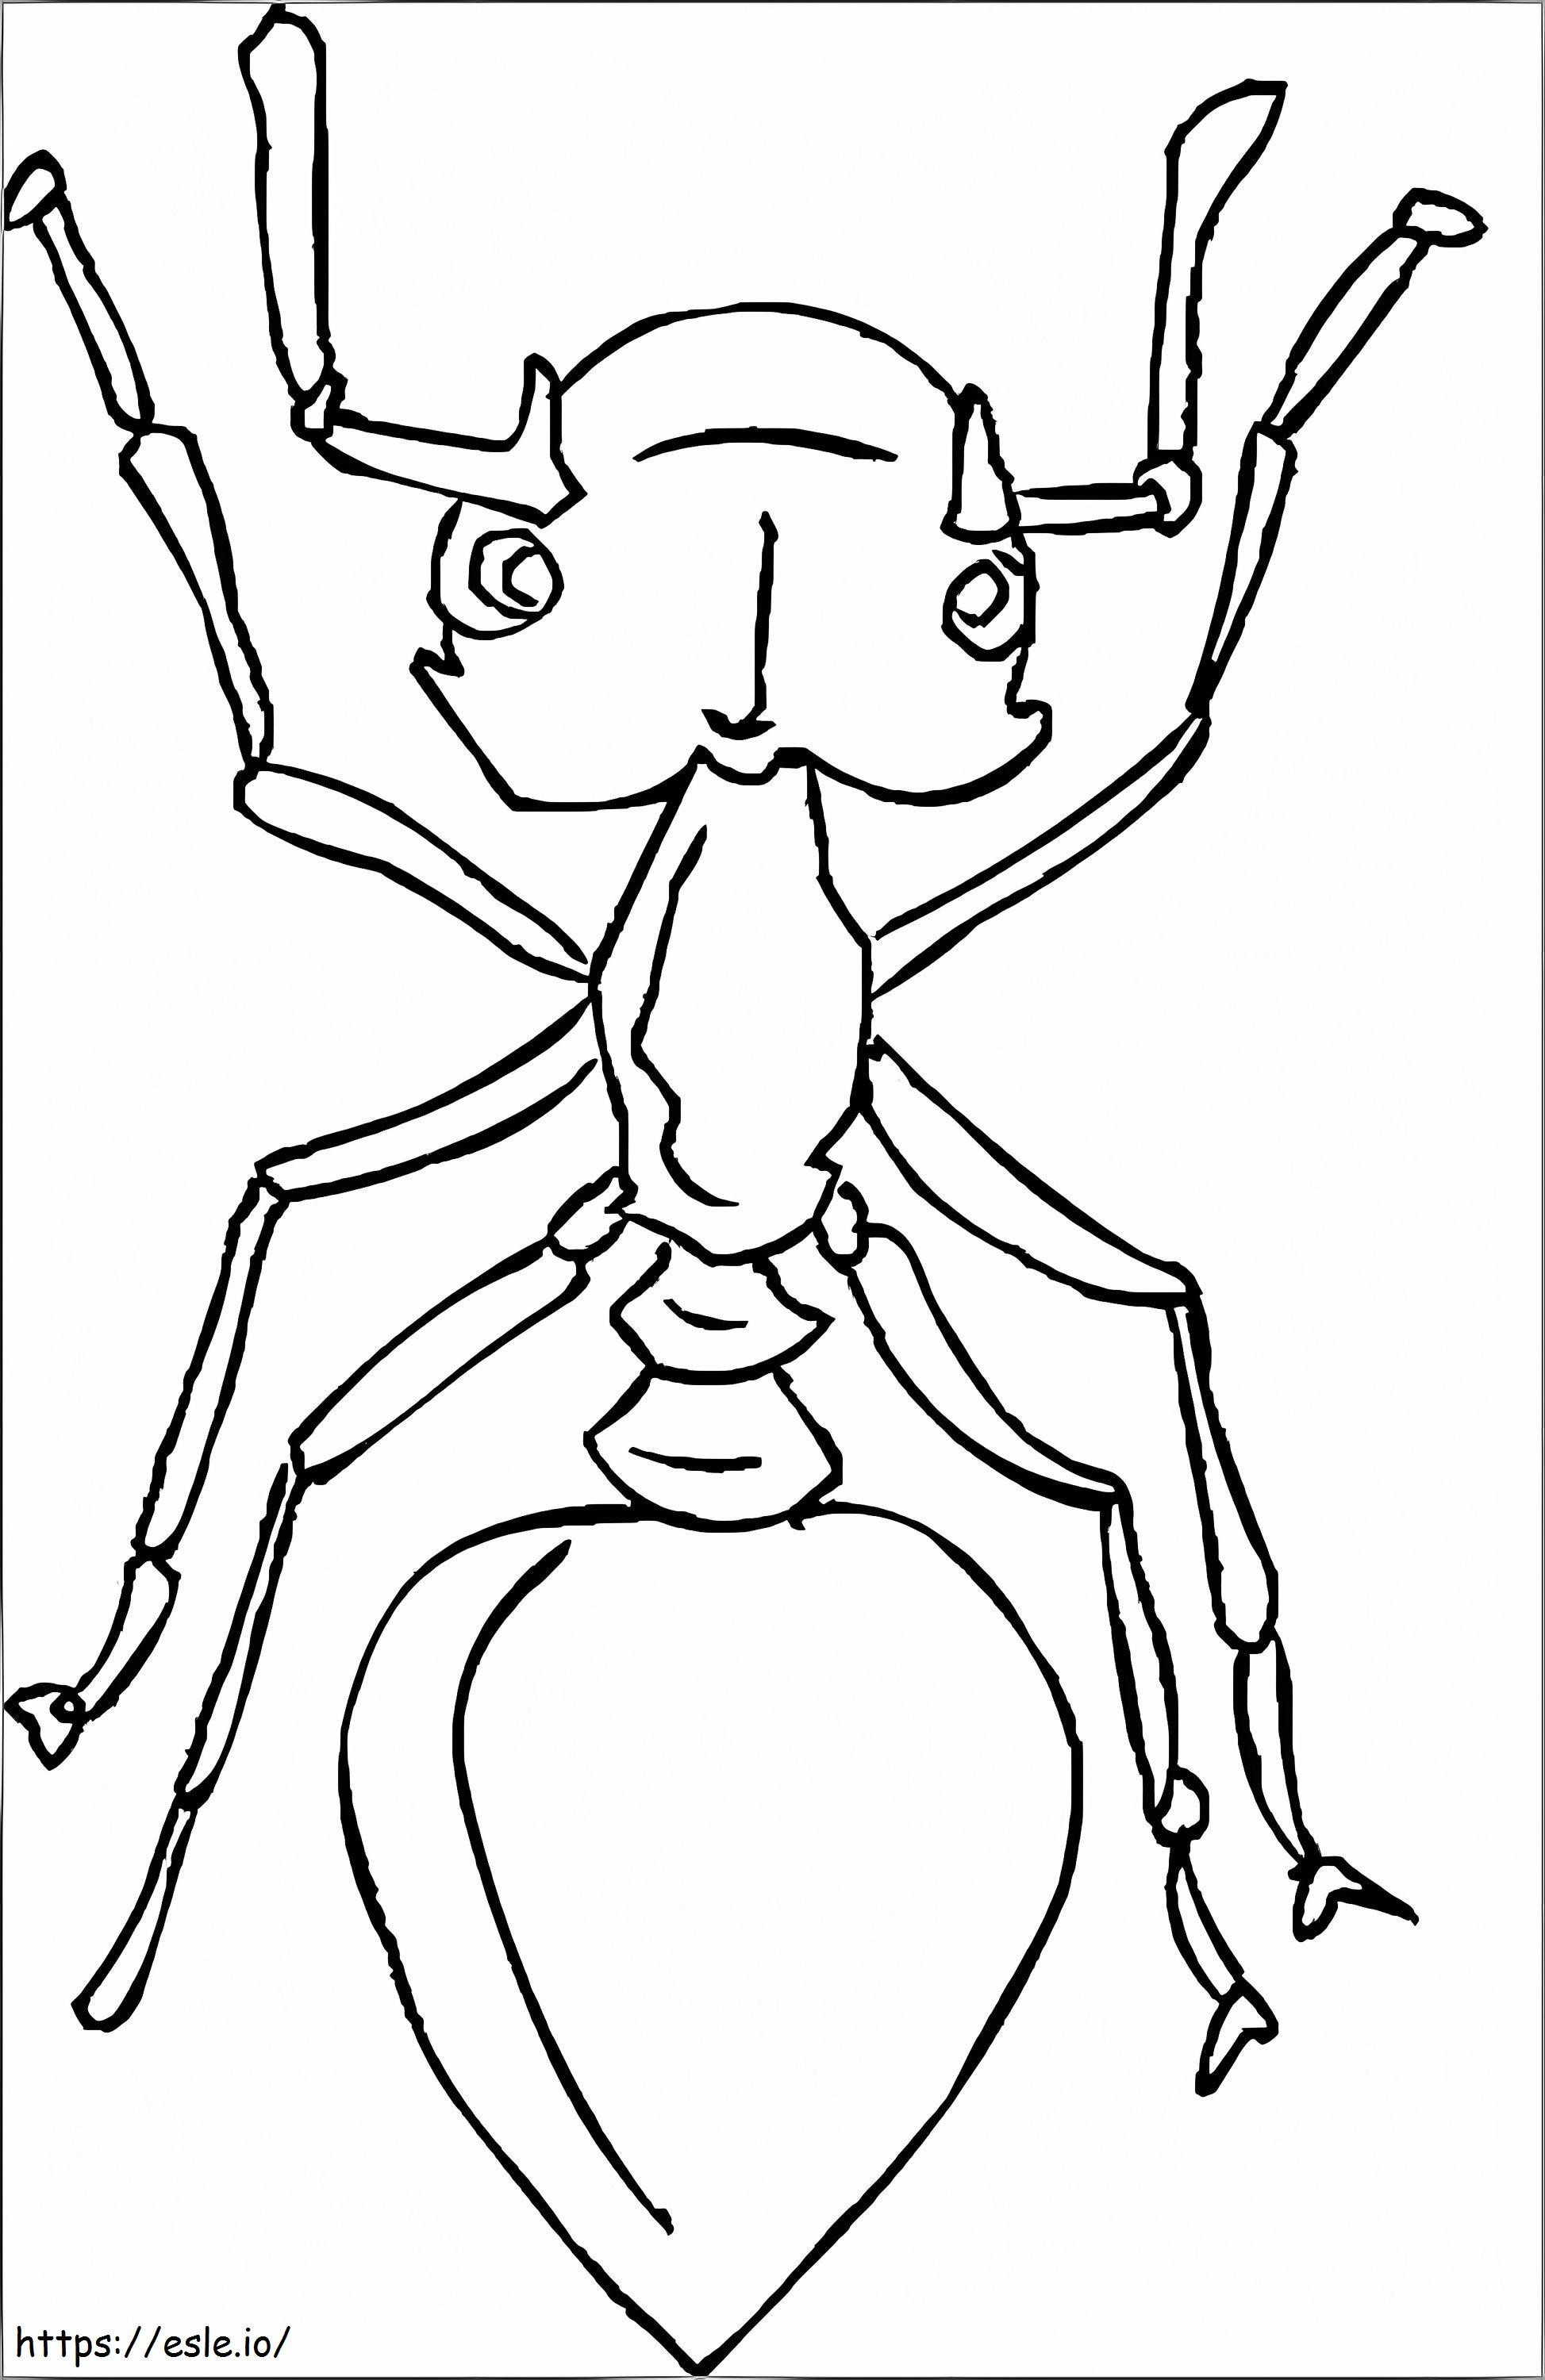 Cute Ant coloring page